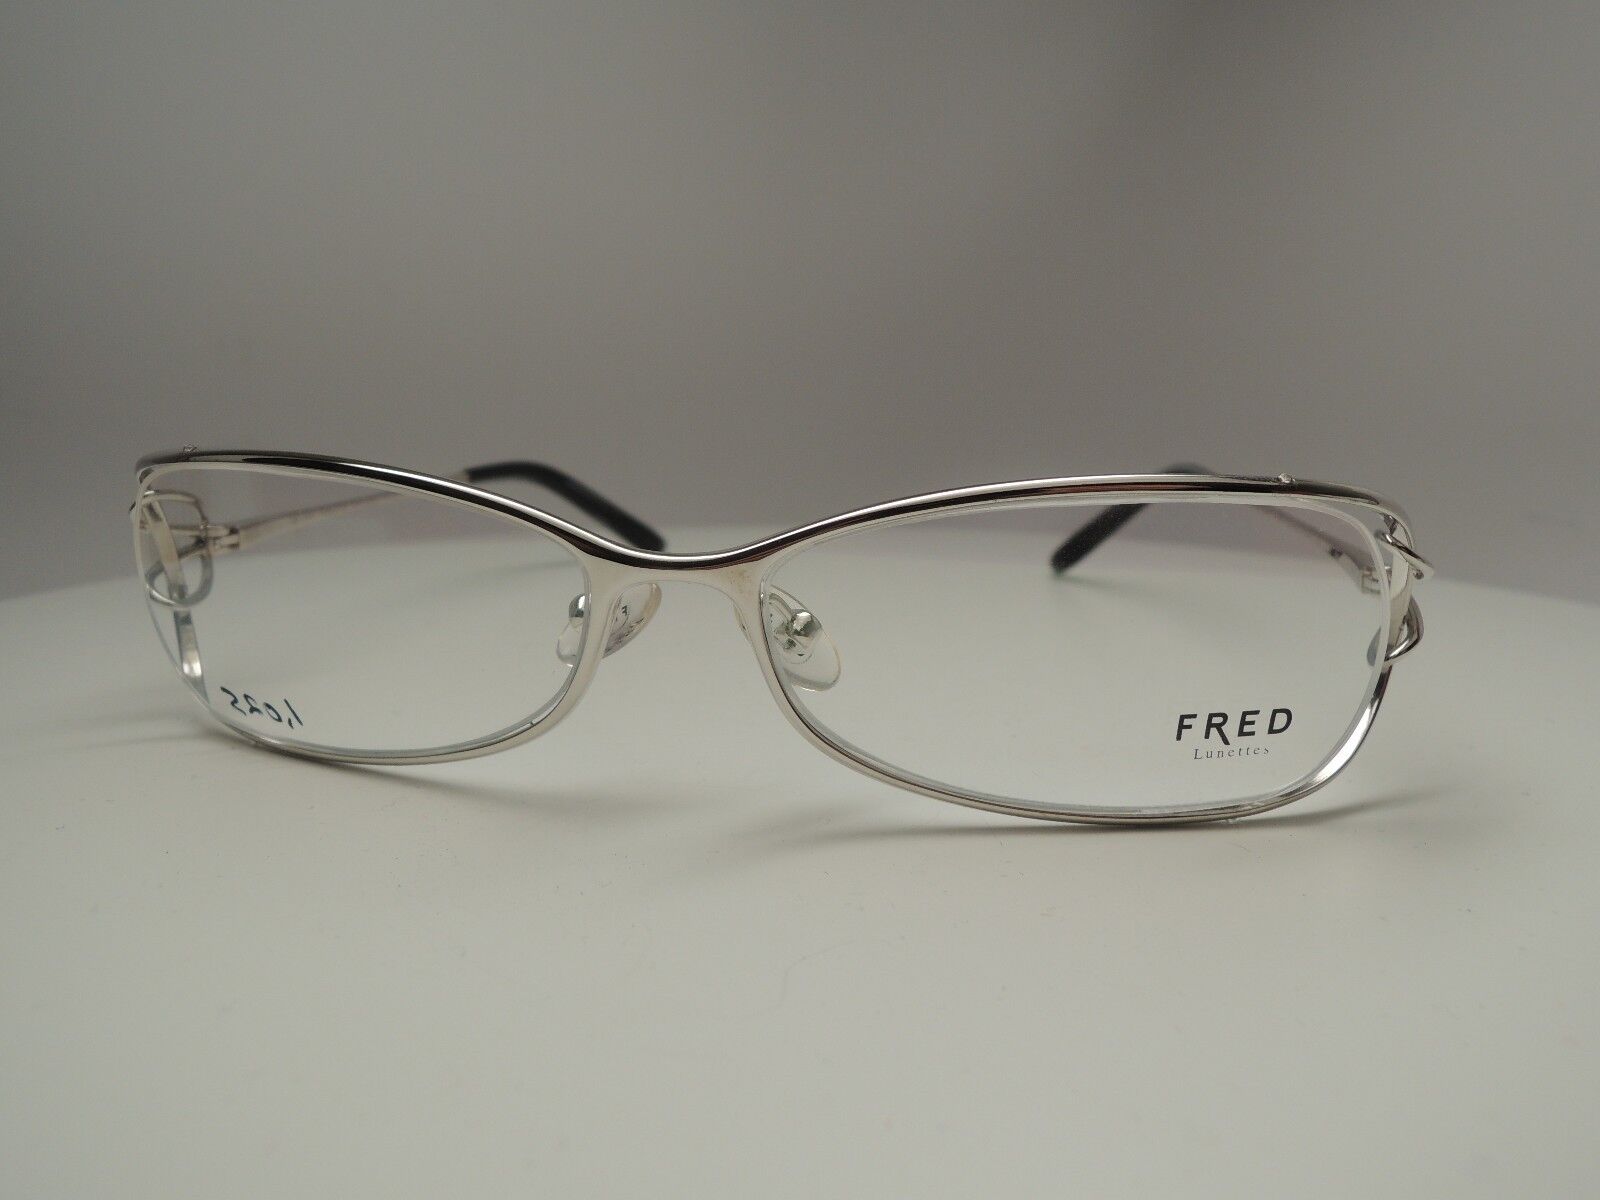 hurt toy Snazzy FRED Lunettes Volute Optique N1 002. Titanium. Brand New. Handmade in  France | eBay